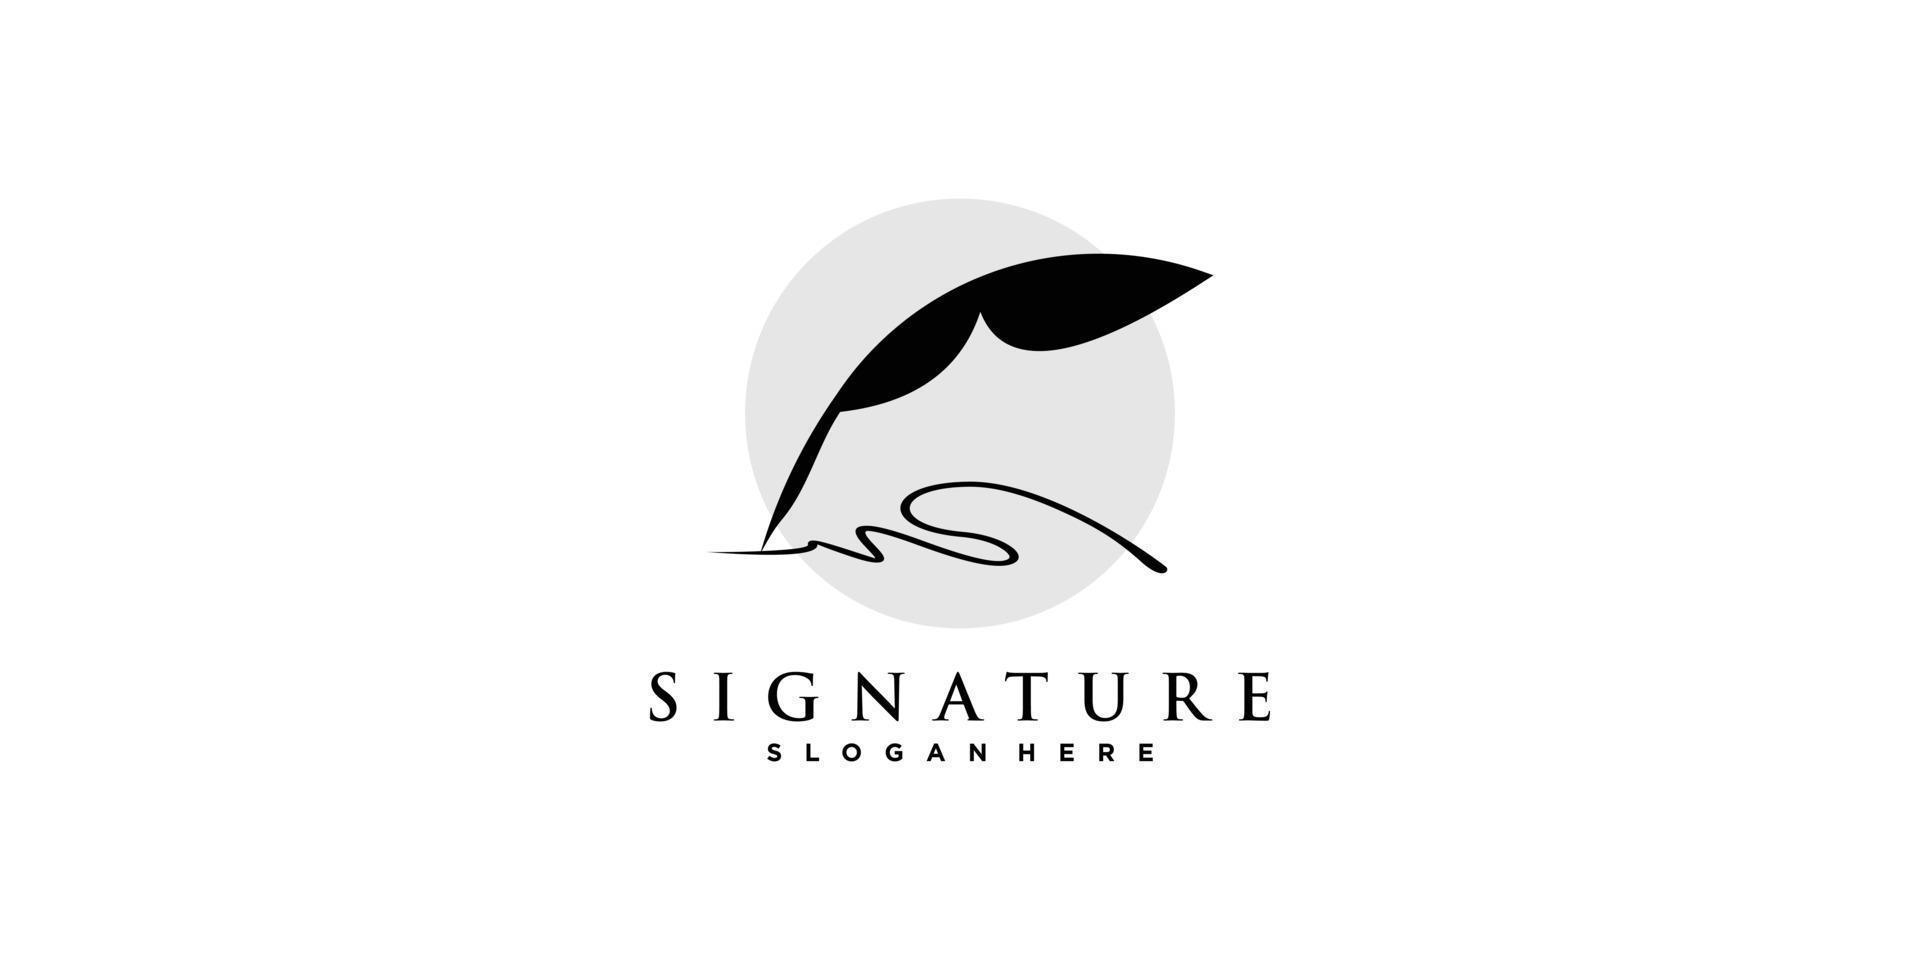 Signature logo abstract with creative style Premium Vector